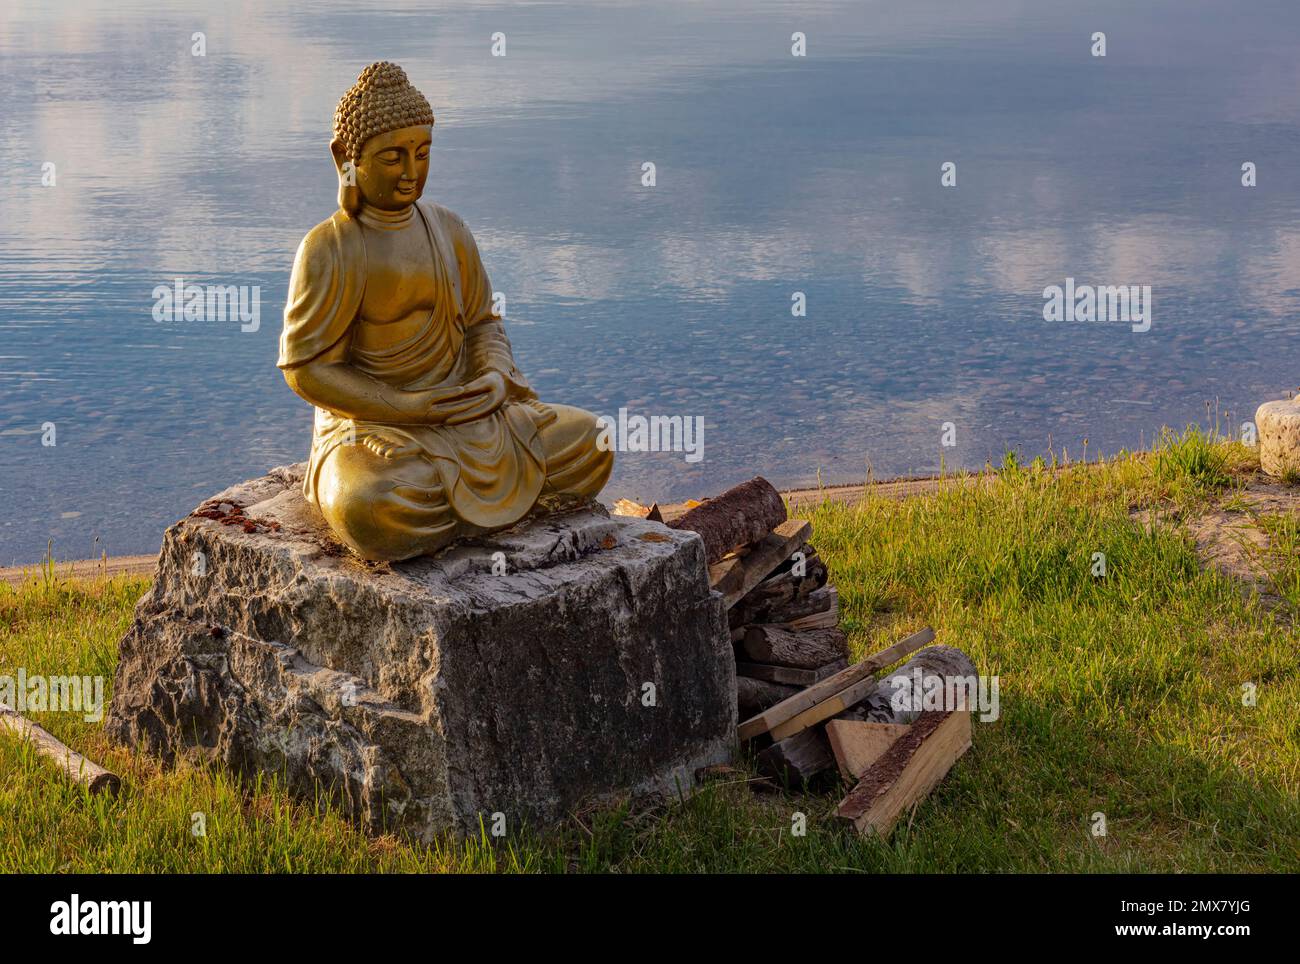 A meditation buddha sits near the waters of a bay on Ontario's Manitoulin Island. Stock Photo